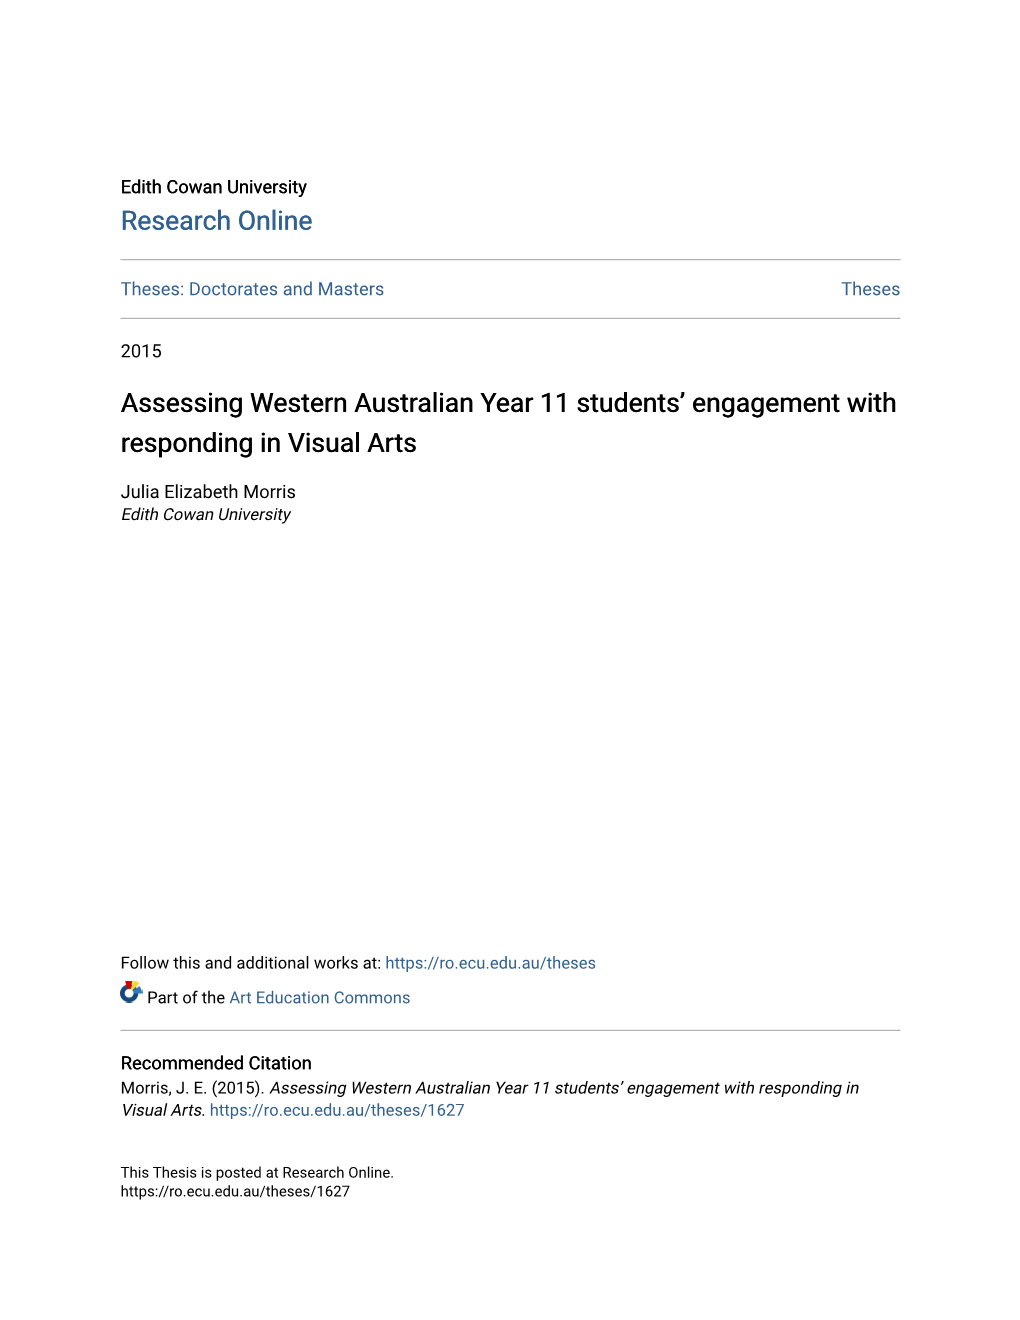 Assessing Western Australian Year 11 Students' Engagement with Theory in Visual Arts